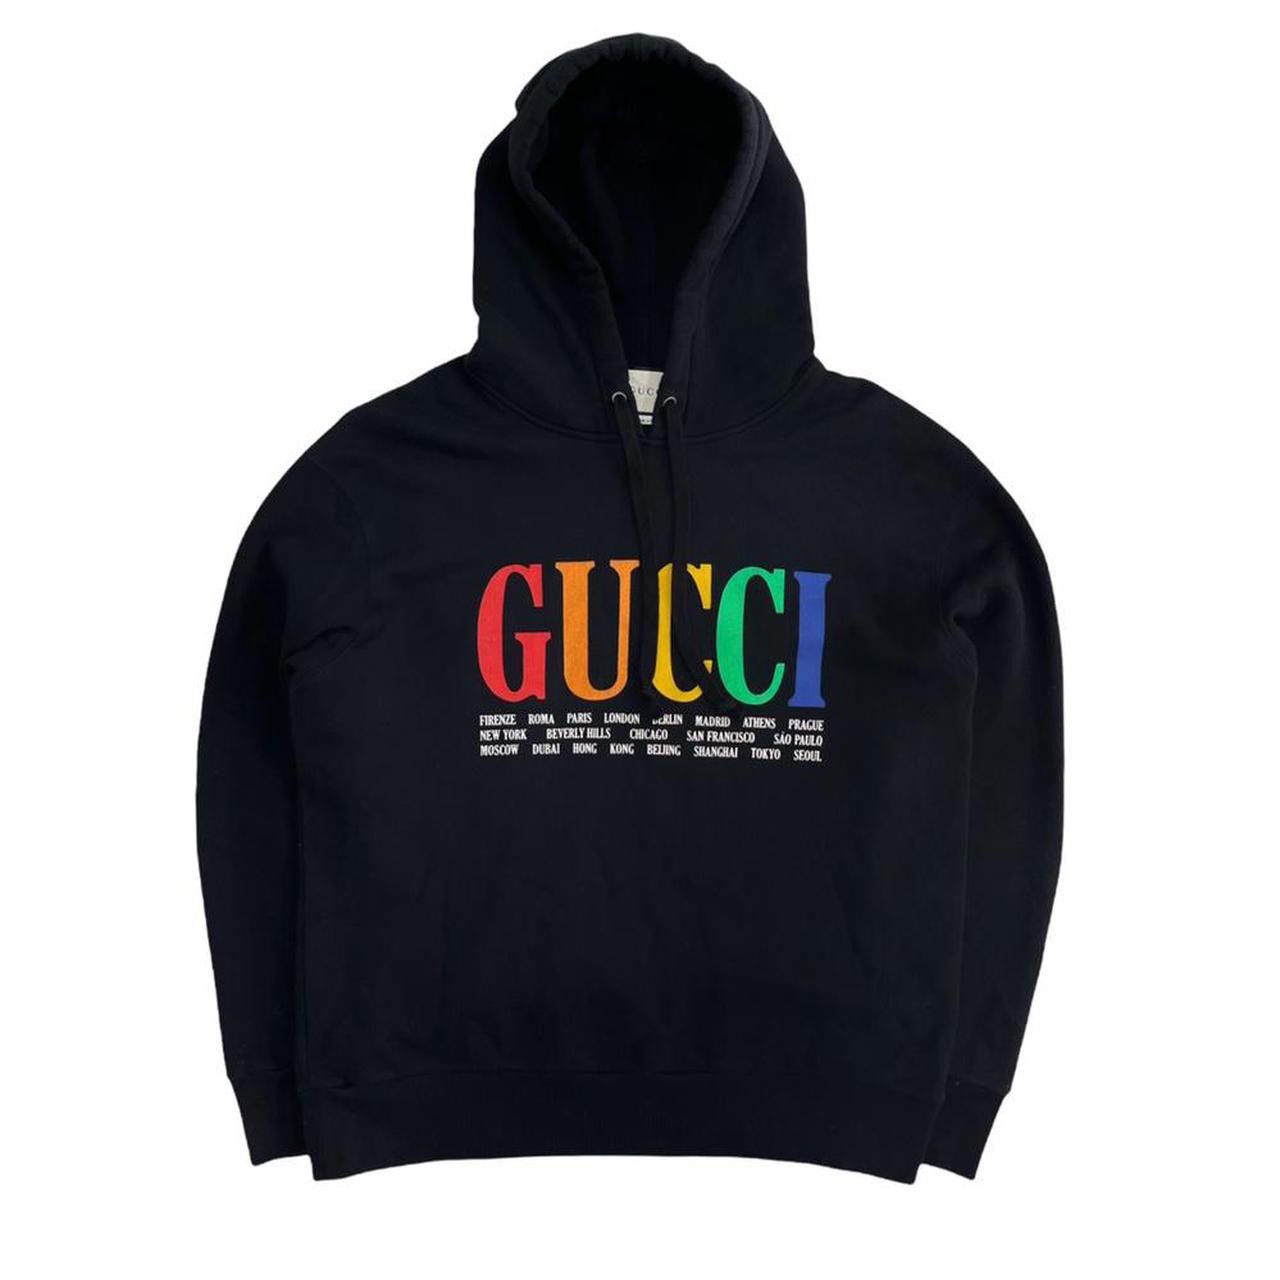 Gucci Gucci Rainbow pullover black hoodie | Grailed